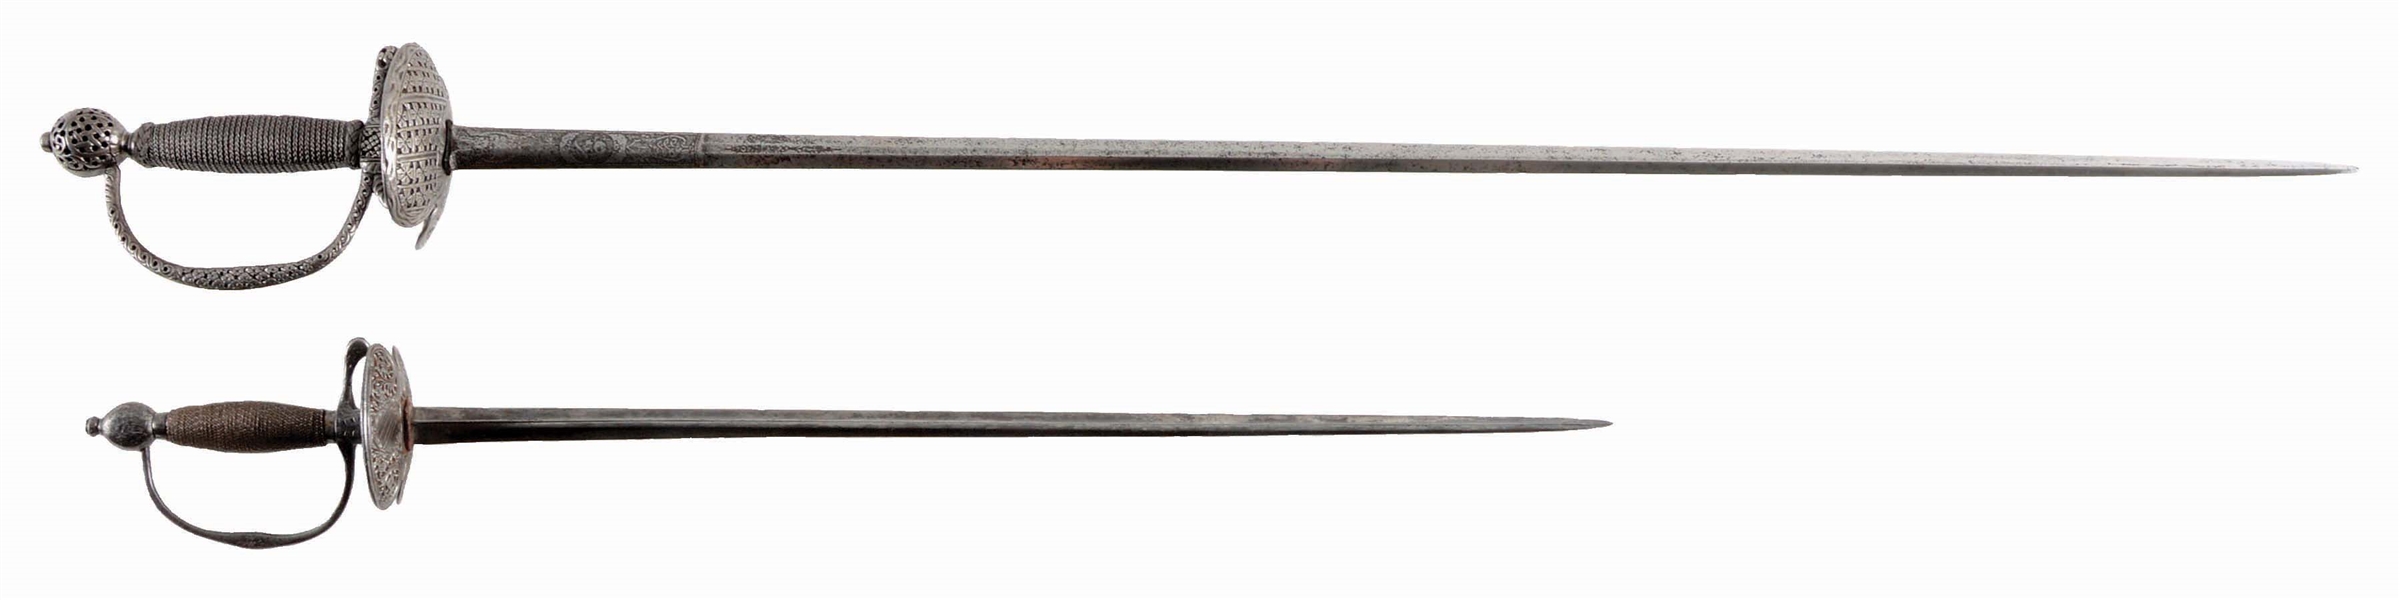 LOT OF 2: TWO EUROPEAN SWORDS, 18TH CENTURY AND LATER. 